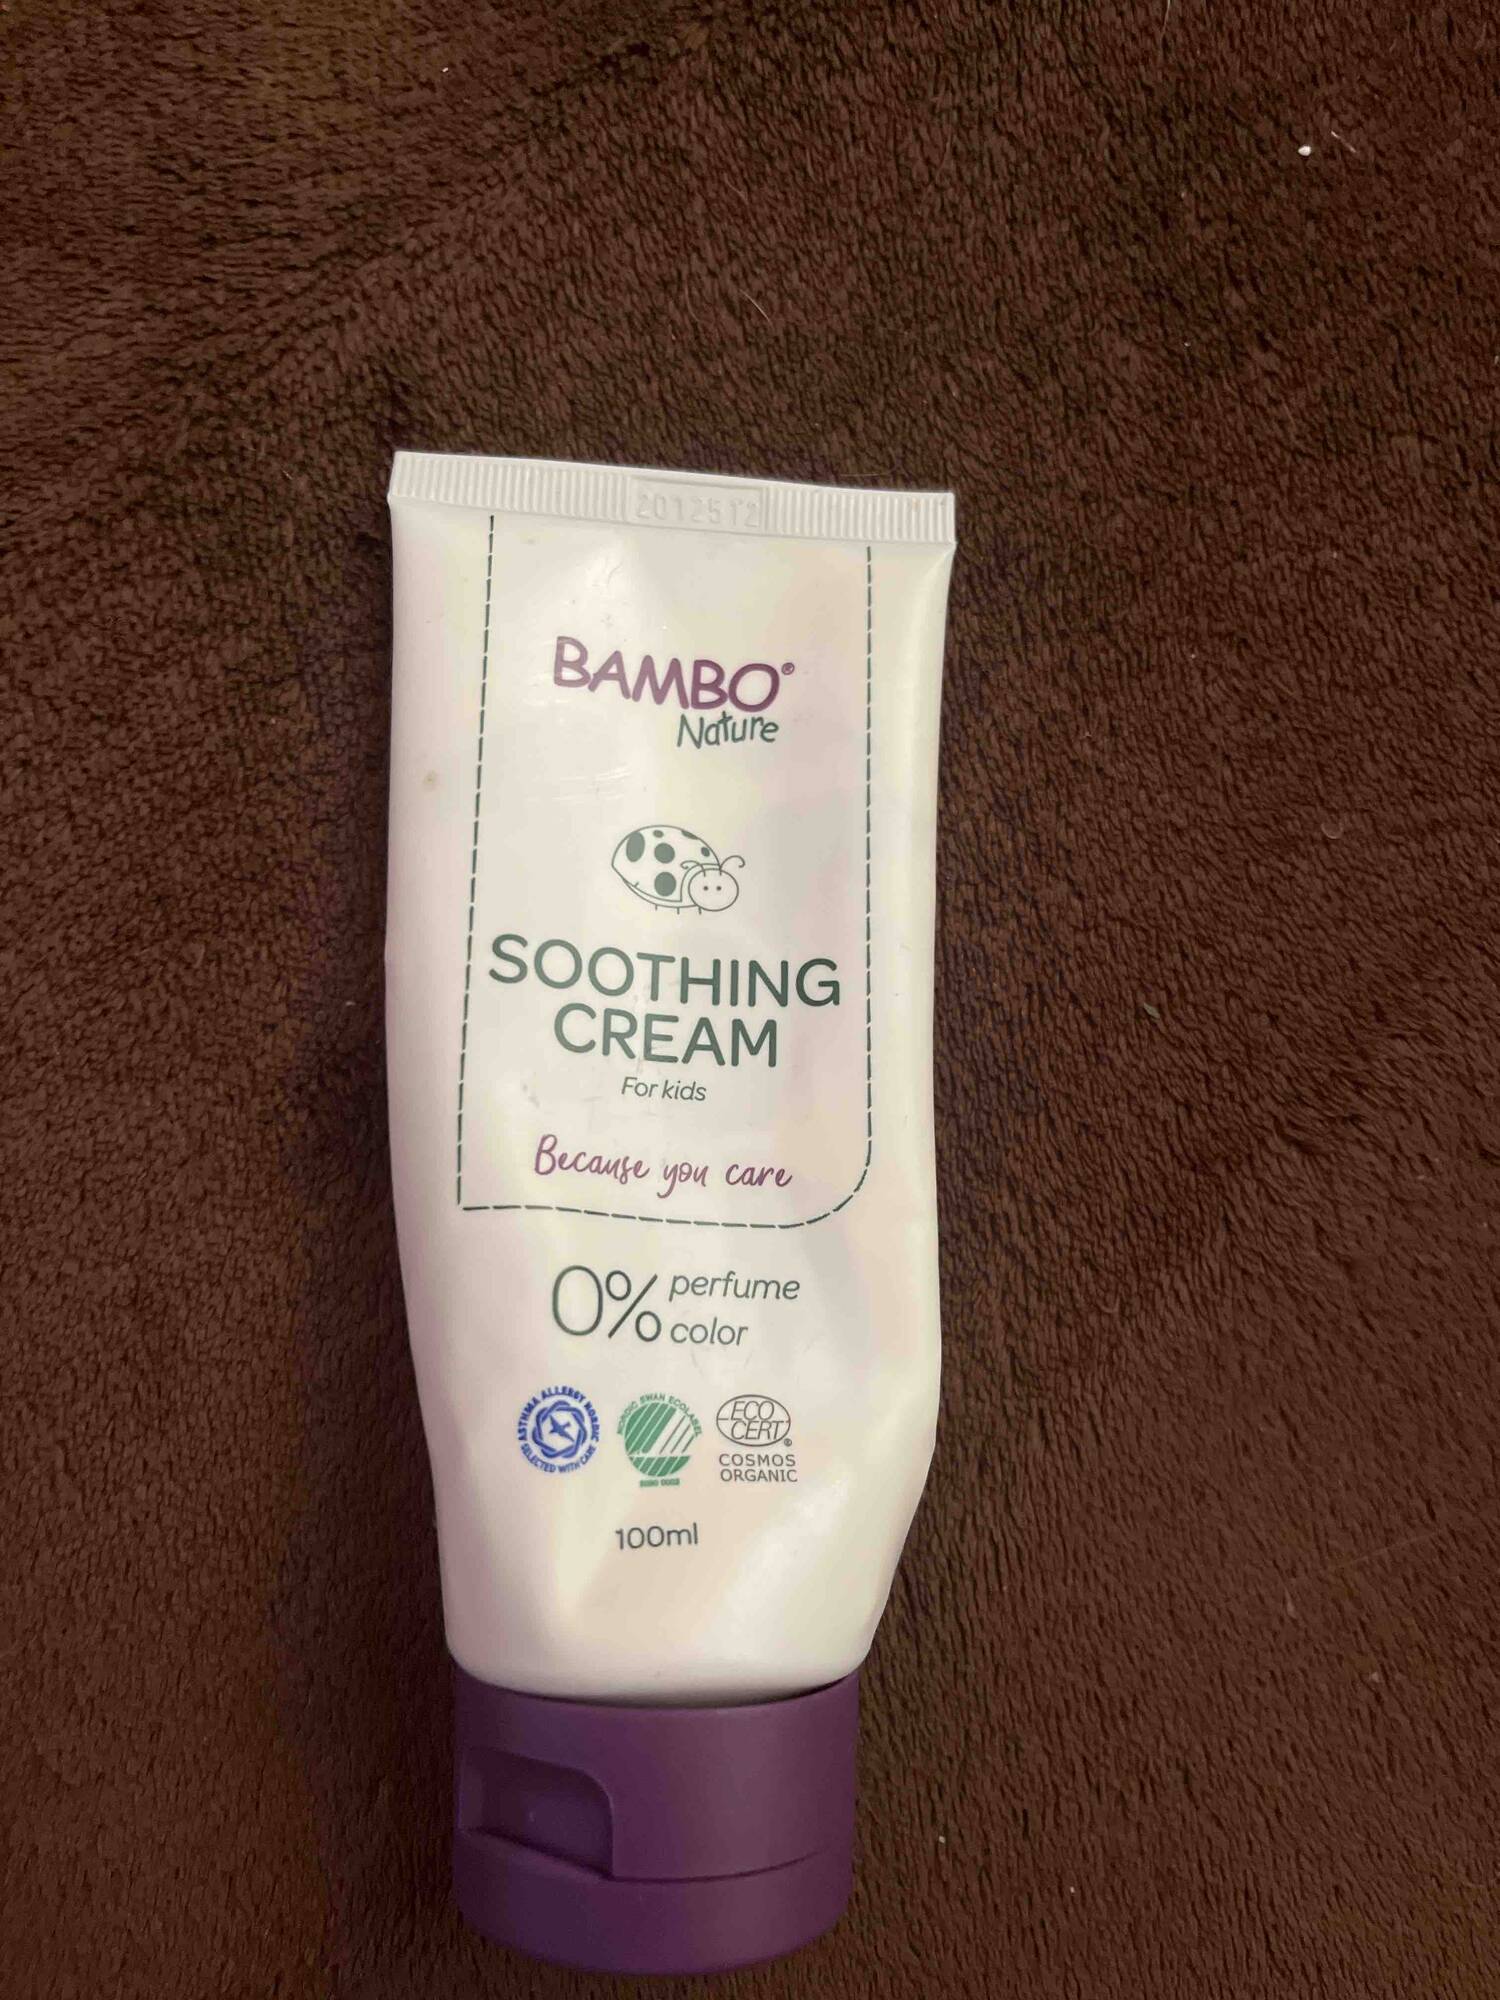 BAMBOO NATURE - Soothing cream for kids 0% perfume color